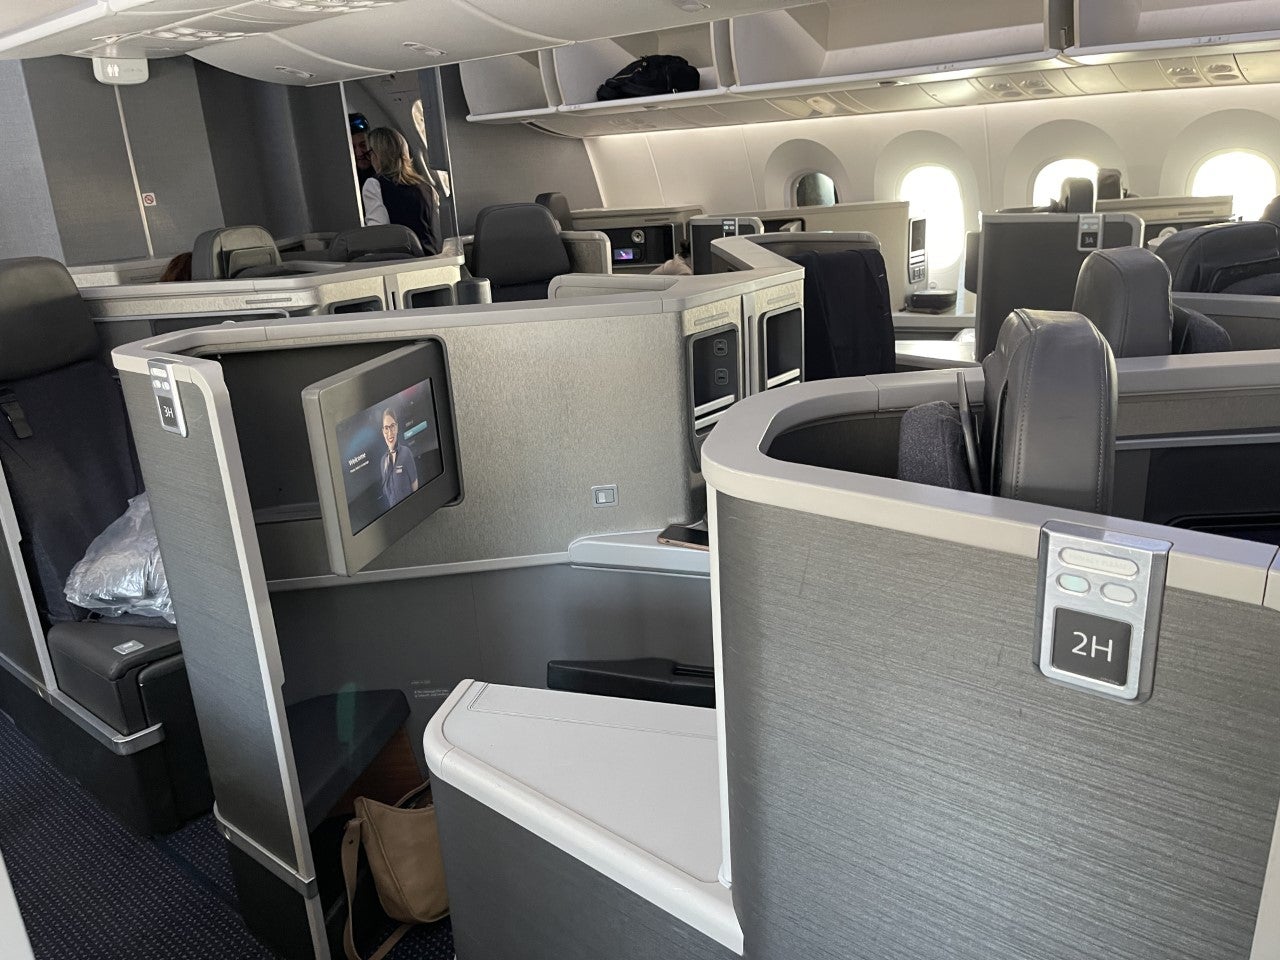 American Airlines Flagship business center seats